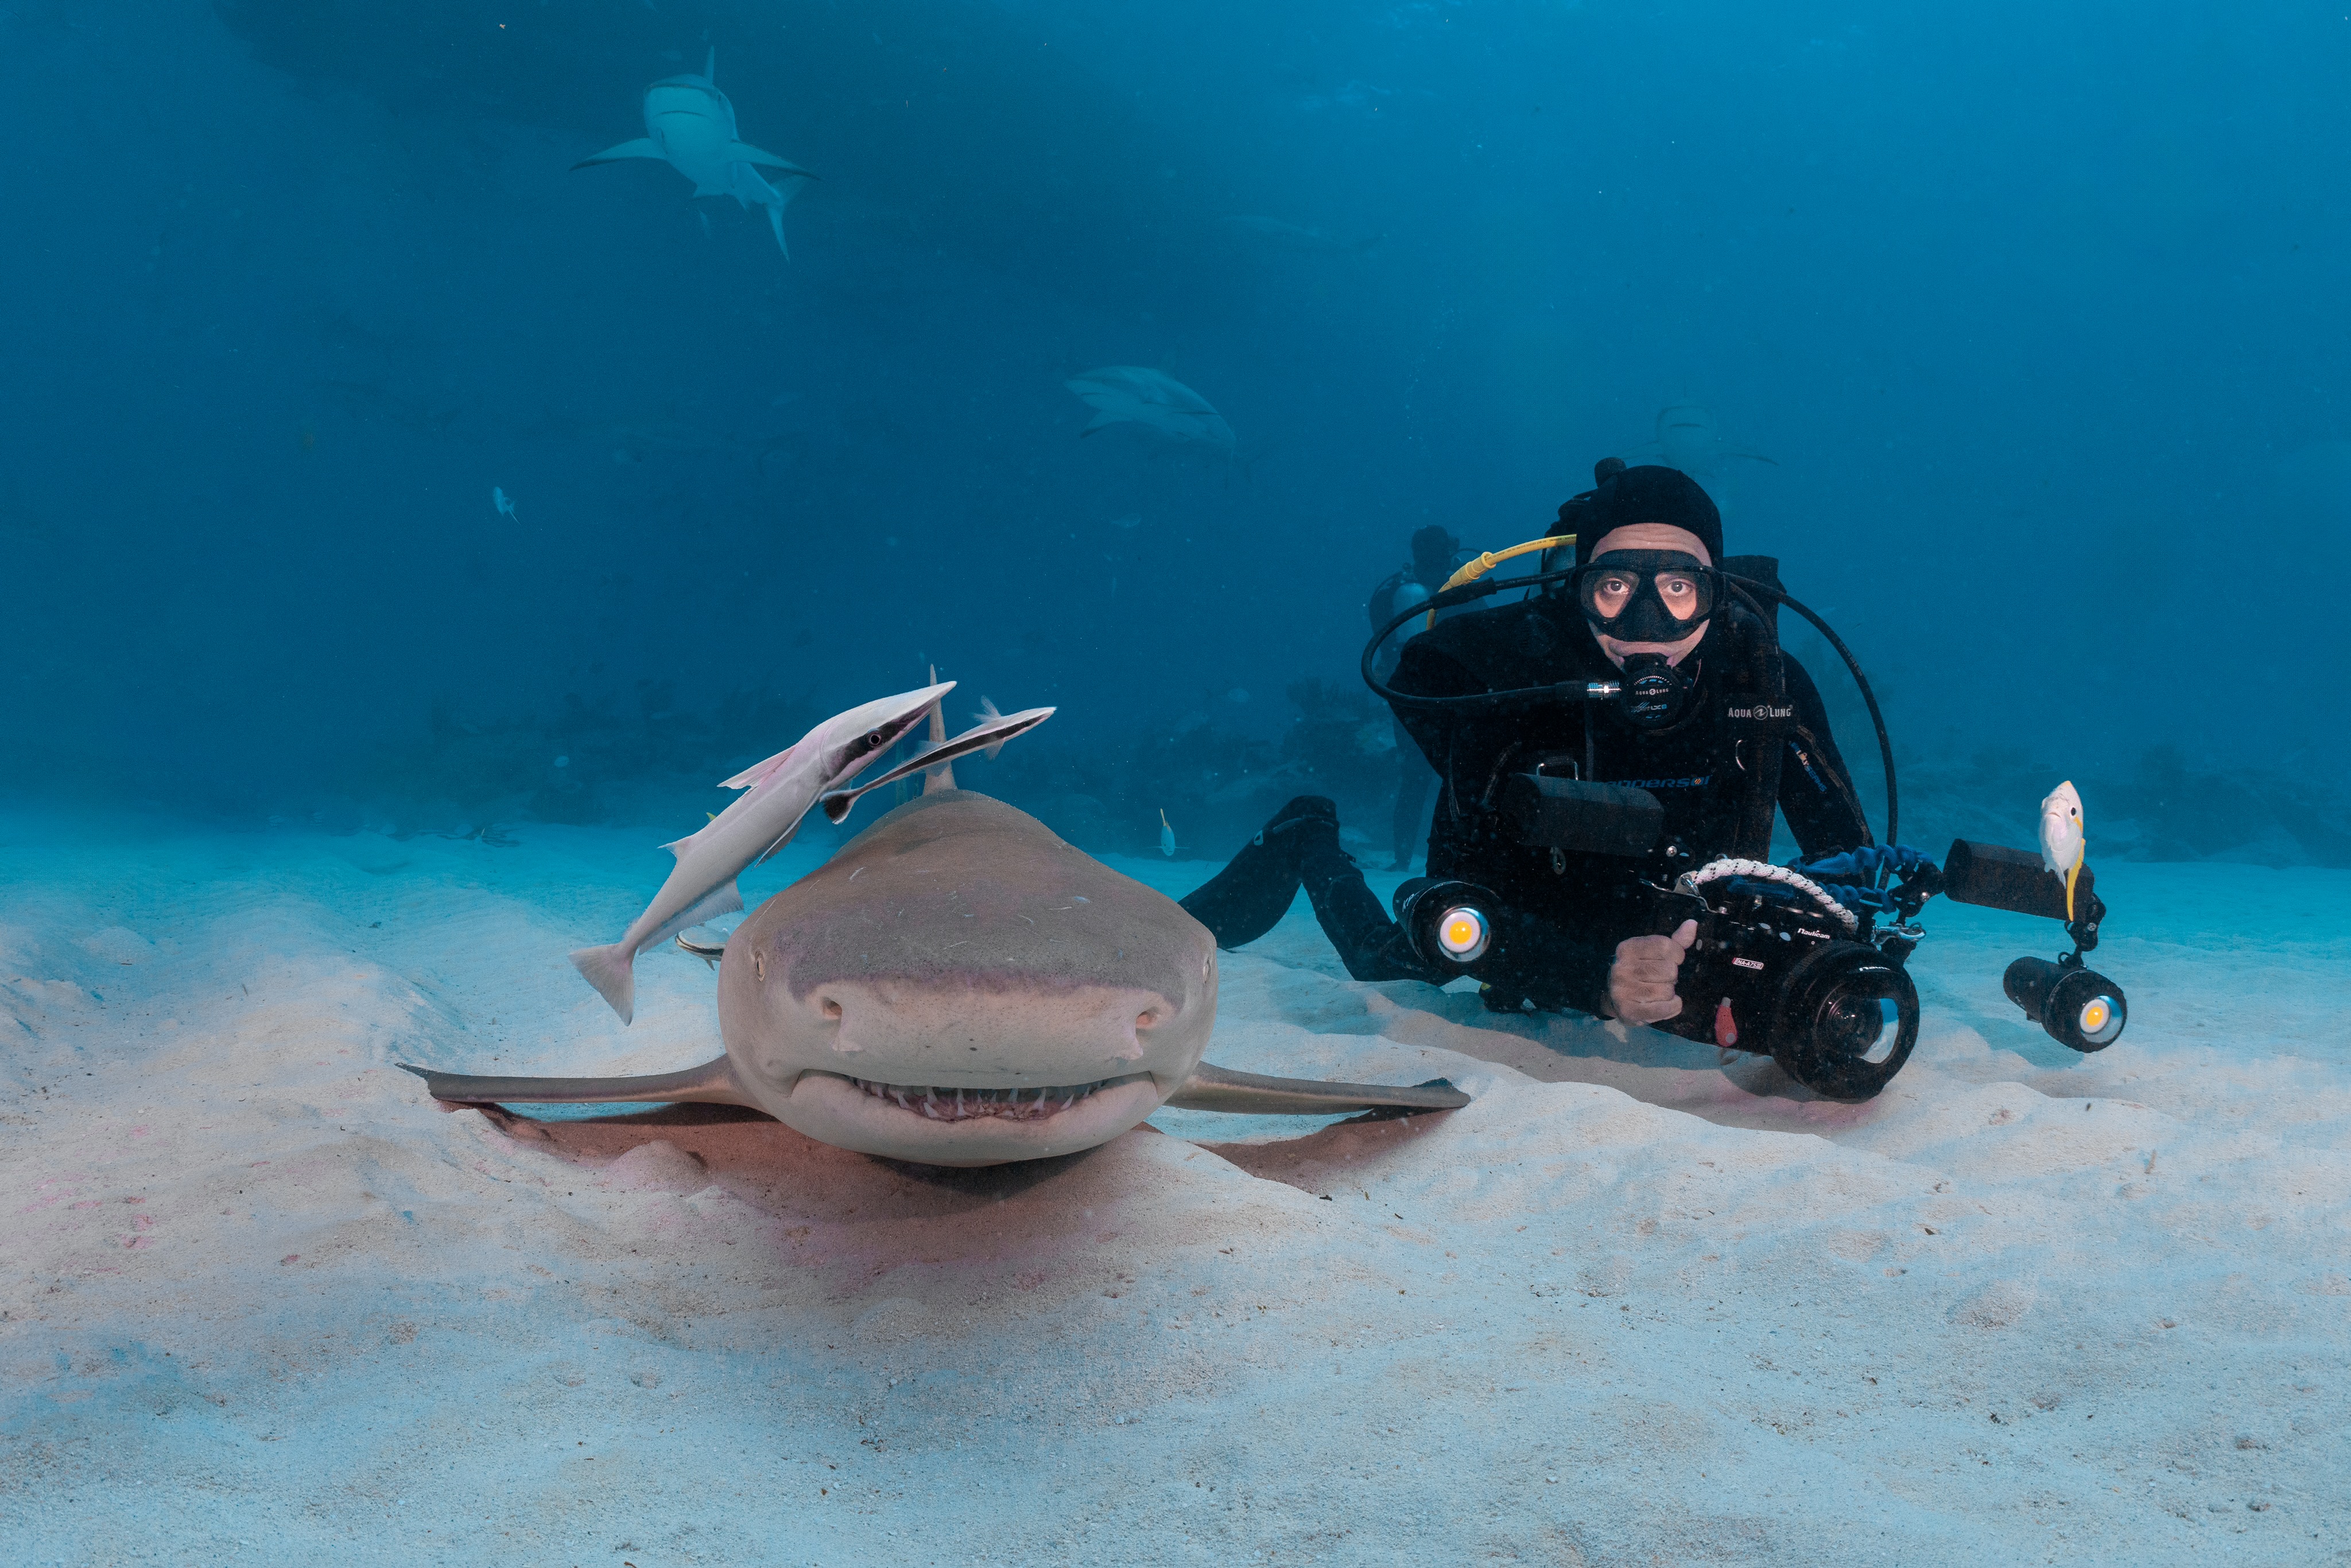 Sharks, who used to be a major source of fear for Khurram Pervaiz, M.D., H’10, are now his favorite sea creatures. Based on the wide smile sported by his selfie companion, the feeling is mutual. Contributed photo.